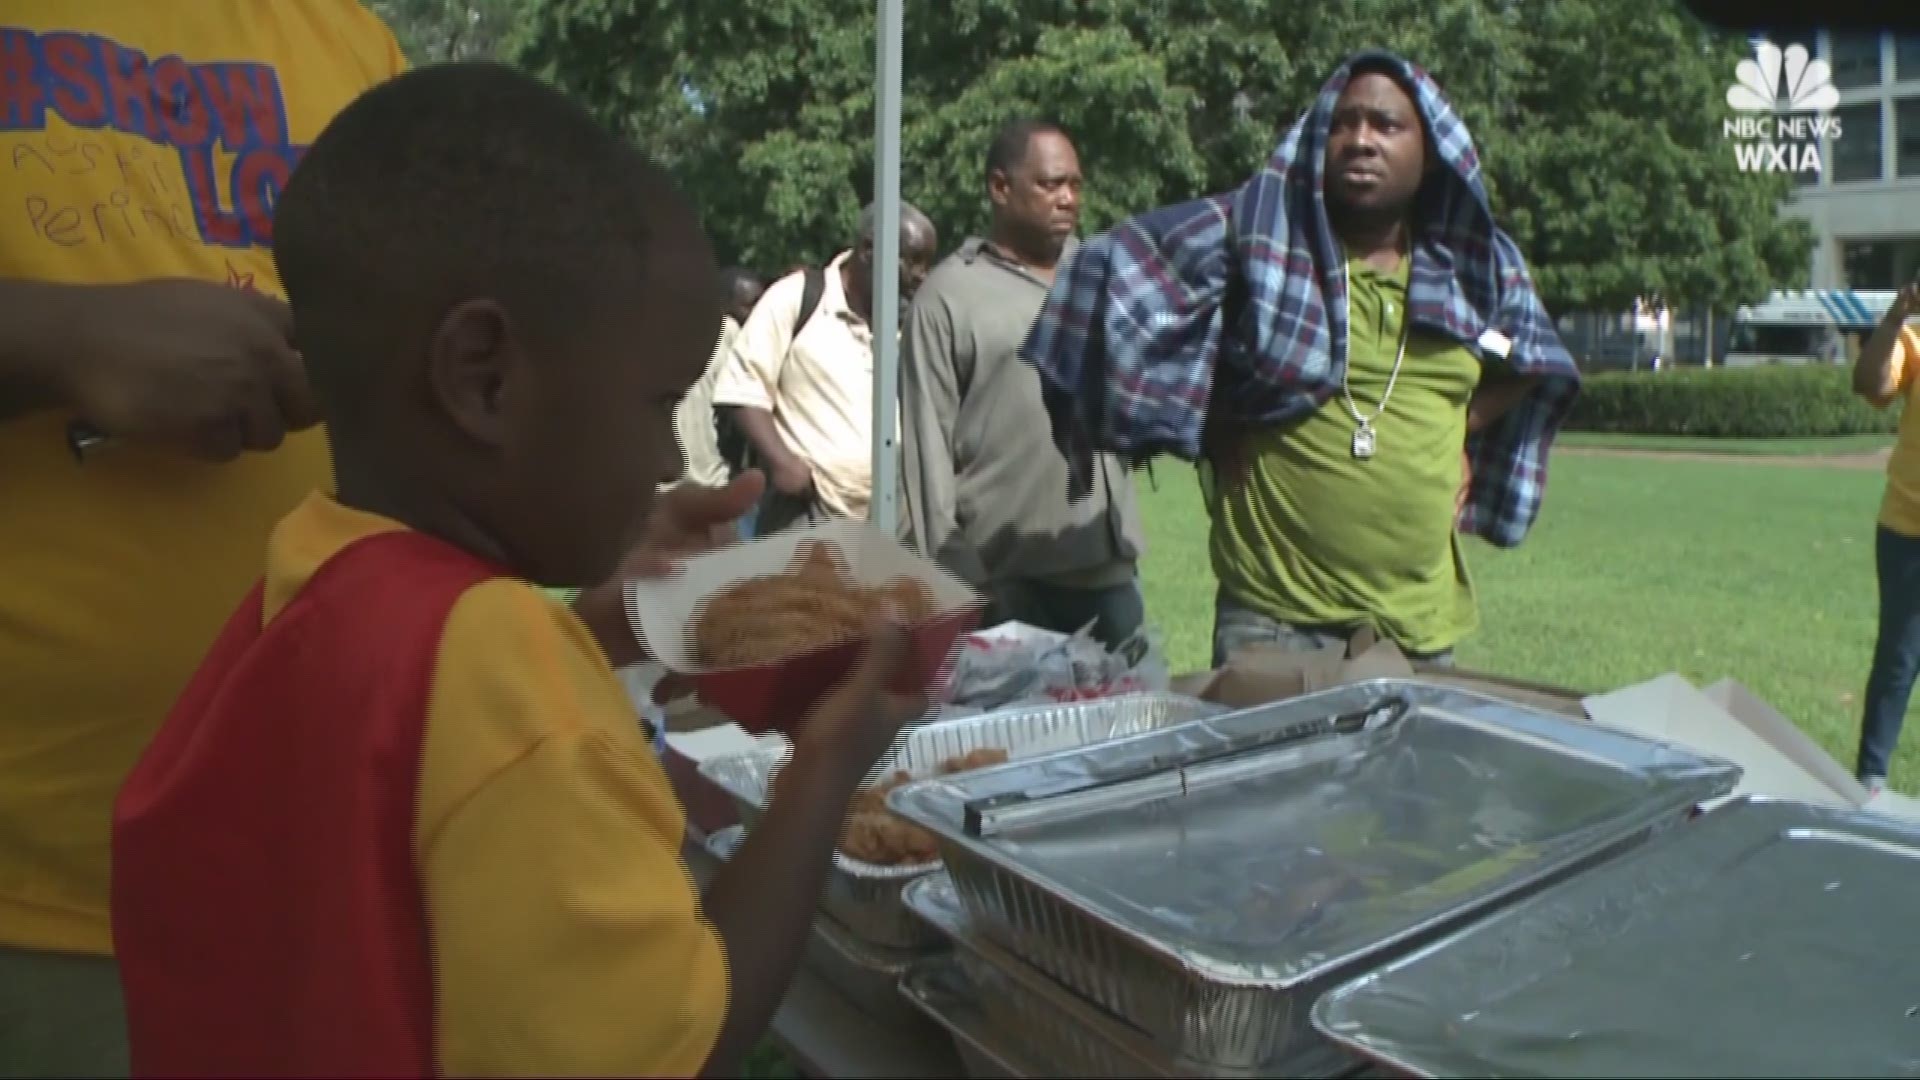 A 4-year old viral super hero partnered with Church's Chicken and Atlanta Community Food Bank to feed the homeless in Atlanta, Georgia. WXIA's Tiffany Sherrod reports.